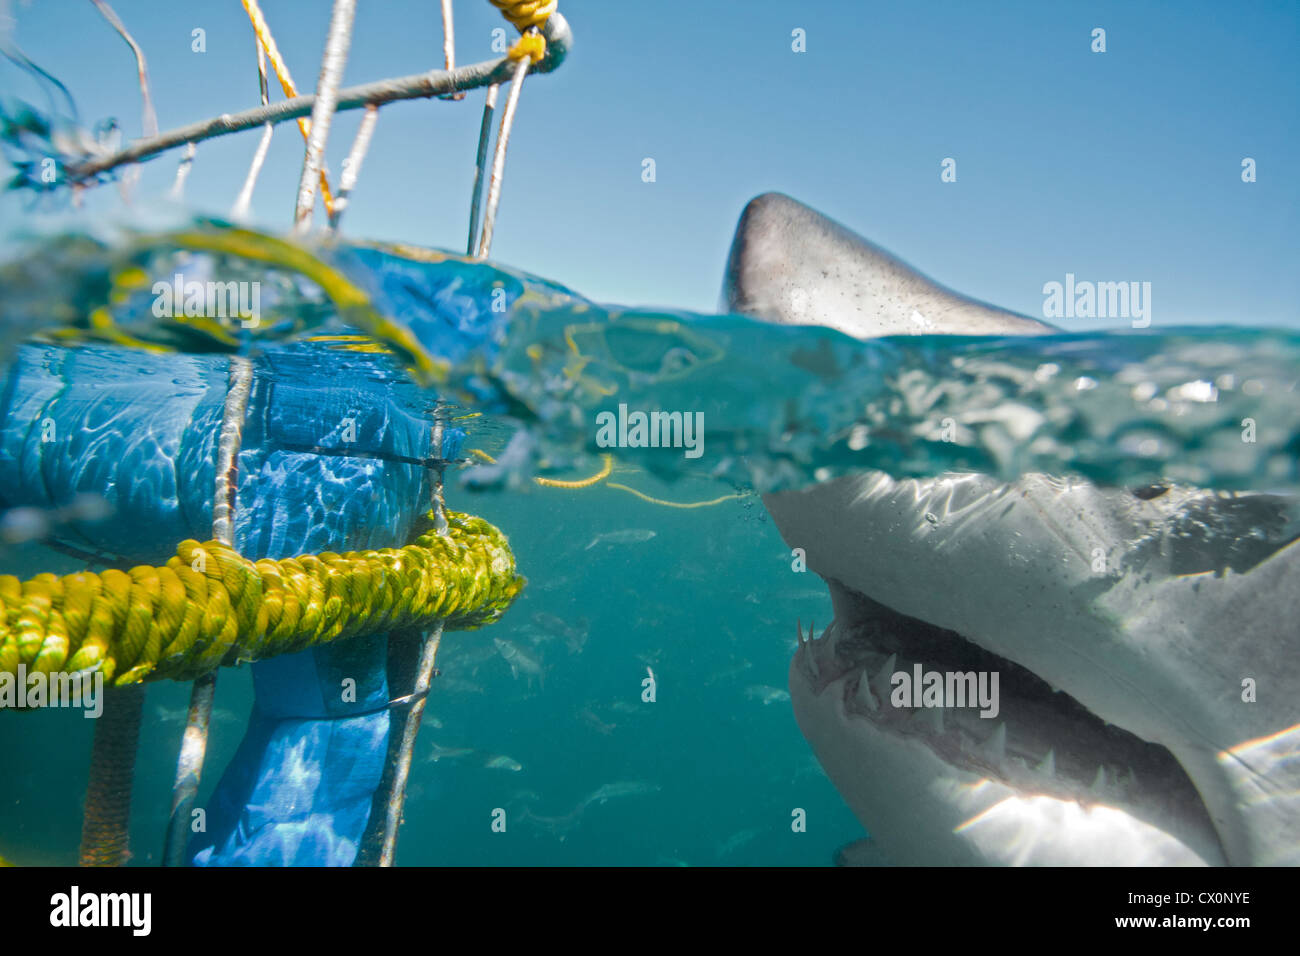 A Great White Shark approaching a cage in Shark Alley, Gansbaai, South Africa Stock Photo